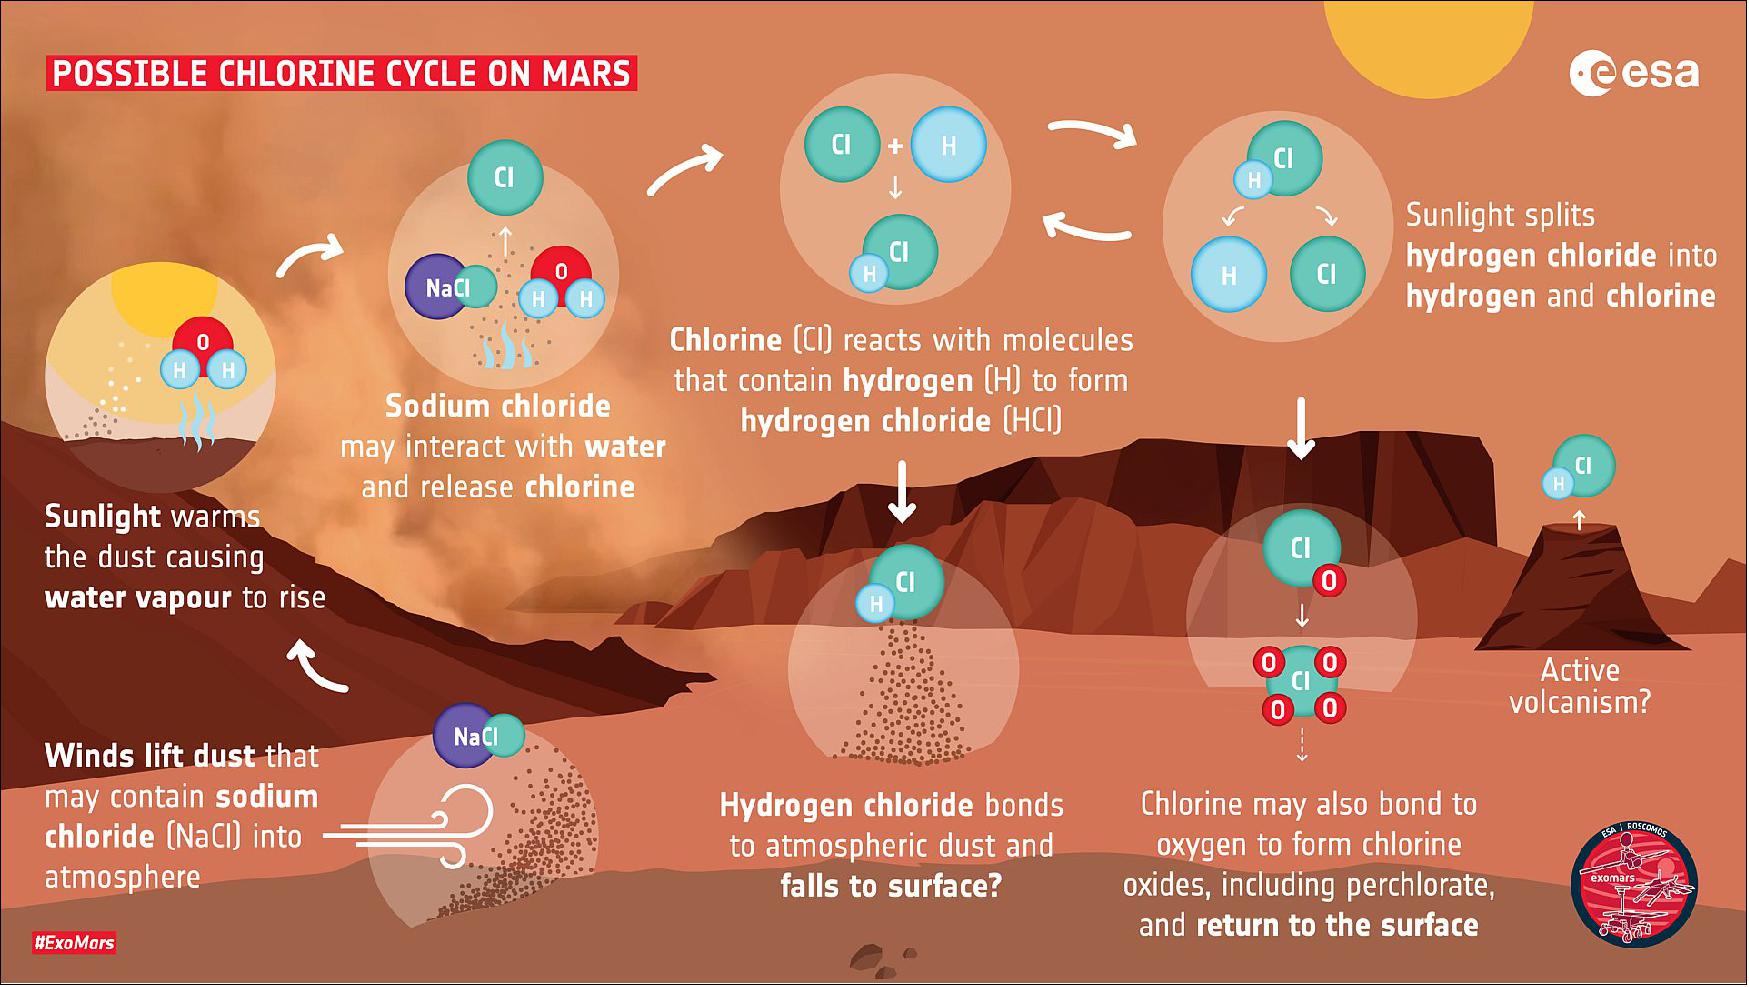 Figure 33: How hydrogen chloride may be created on Mars. This graphic describes a possible new chemistry cycle on Mars following the discovery of hydrogen chloride in the atmosphere by the ESA-Roscosmos ExoMars Trace Gas Orbiter. Salts in the form of sodium chloride (NaCl) – remnants of evaporated oceans and embedded in the dusty surface of Mars – are widespread on the surface of Mars. Winds lift this salty dust into the atmosphere. Sunlight warms the dusty atmosphere causing water vapor released from ice caps to rise. The salty dust reacts with atmospheric water to release chlorine (Cl), which itself then reacts with molecules containing hydrogen (H) to create hydrogen chloride (HCl). A similar process takes place on Earth: sea salt is blown into the air, and if it mixes with water vapor, chlorine becomes available for chemical reactions that form HCl. - Further reactions could see the chlorine or hydrogen chloride-rich dust return to the surface of Mars perhaps as perchlorates, a class of salt made of oxygen and chlorine. The HCl is observed to quickly appear and disappear from the atmosphere so it must be created and destroyed rapidly, with some fraction returned to the surface. -The ExoMars observations suggest this might be an annual process driven by the changing seasons, specifically the warming of the southern hemisphere ice cap during southern summer, which releases water vapor into the atmosphere. The extra warmth also generates strong winds as air moves from warm to cool regions. In turn, the winds lift more dust, triggering regional and global dust storms. - The graphic is simplified to show very broadly one possible way that hydrogen chloride is generated; there are likely additional pathways for the chemical reactions that could also be at play, perhaps with other trace gases that ExoMars hasn’t discovered yet (image credit: ESA)